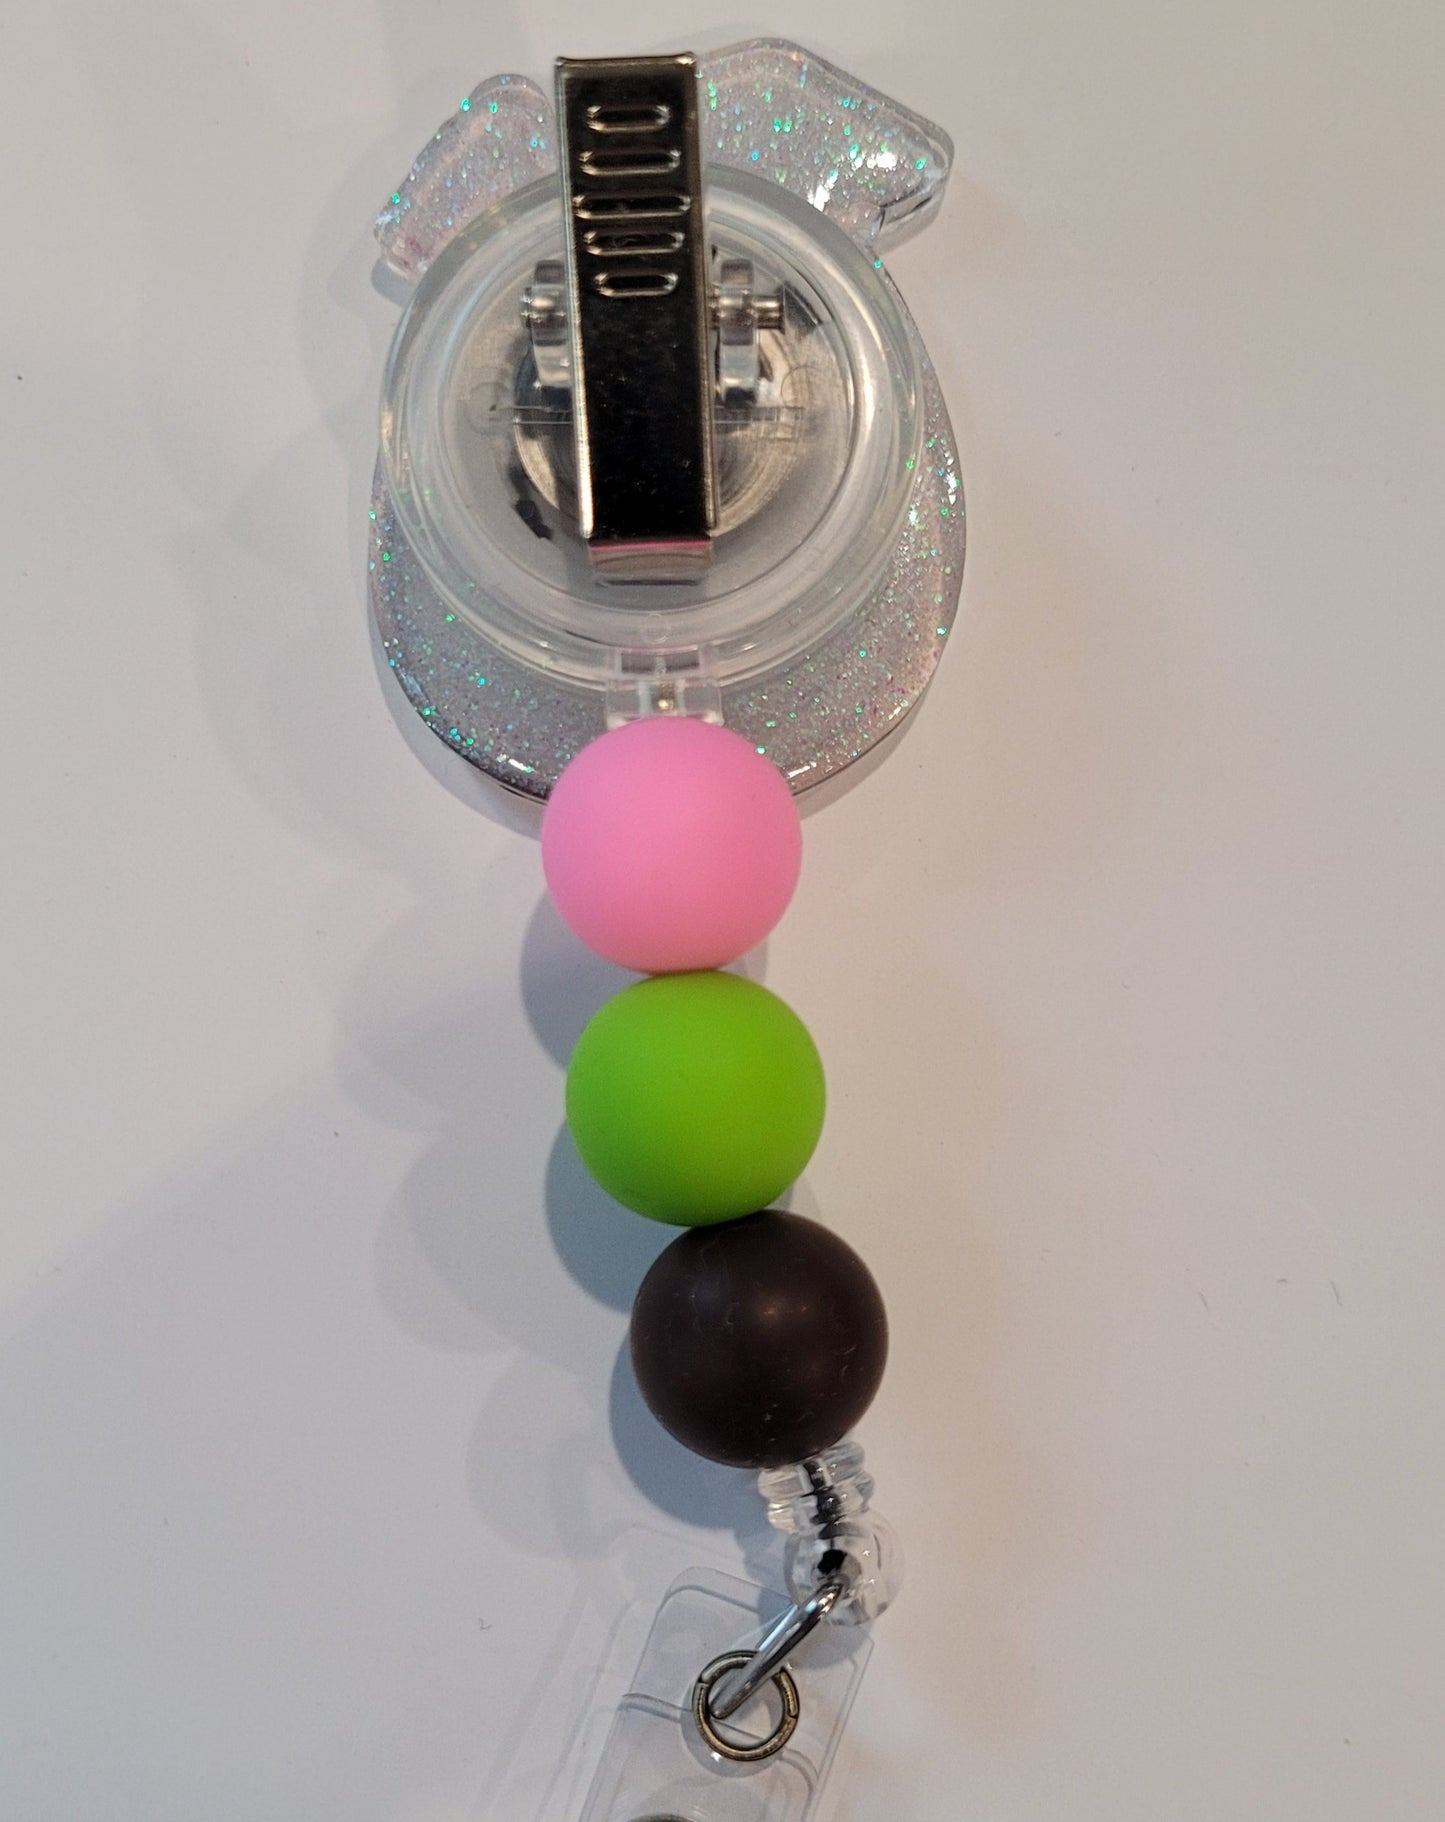 Enjoy this tasty Caribbean Cocktail Badge Reel that any rum lover would be happy to have. Sporting a drink in a coconut shell with umbrella &amp; straw, glitter back and 3 color coordinated silicone beads to finish the look. Last Call!&nbsp;